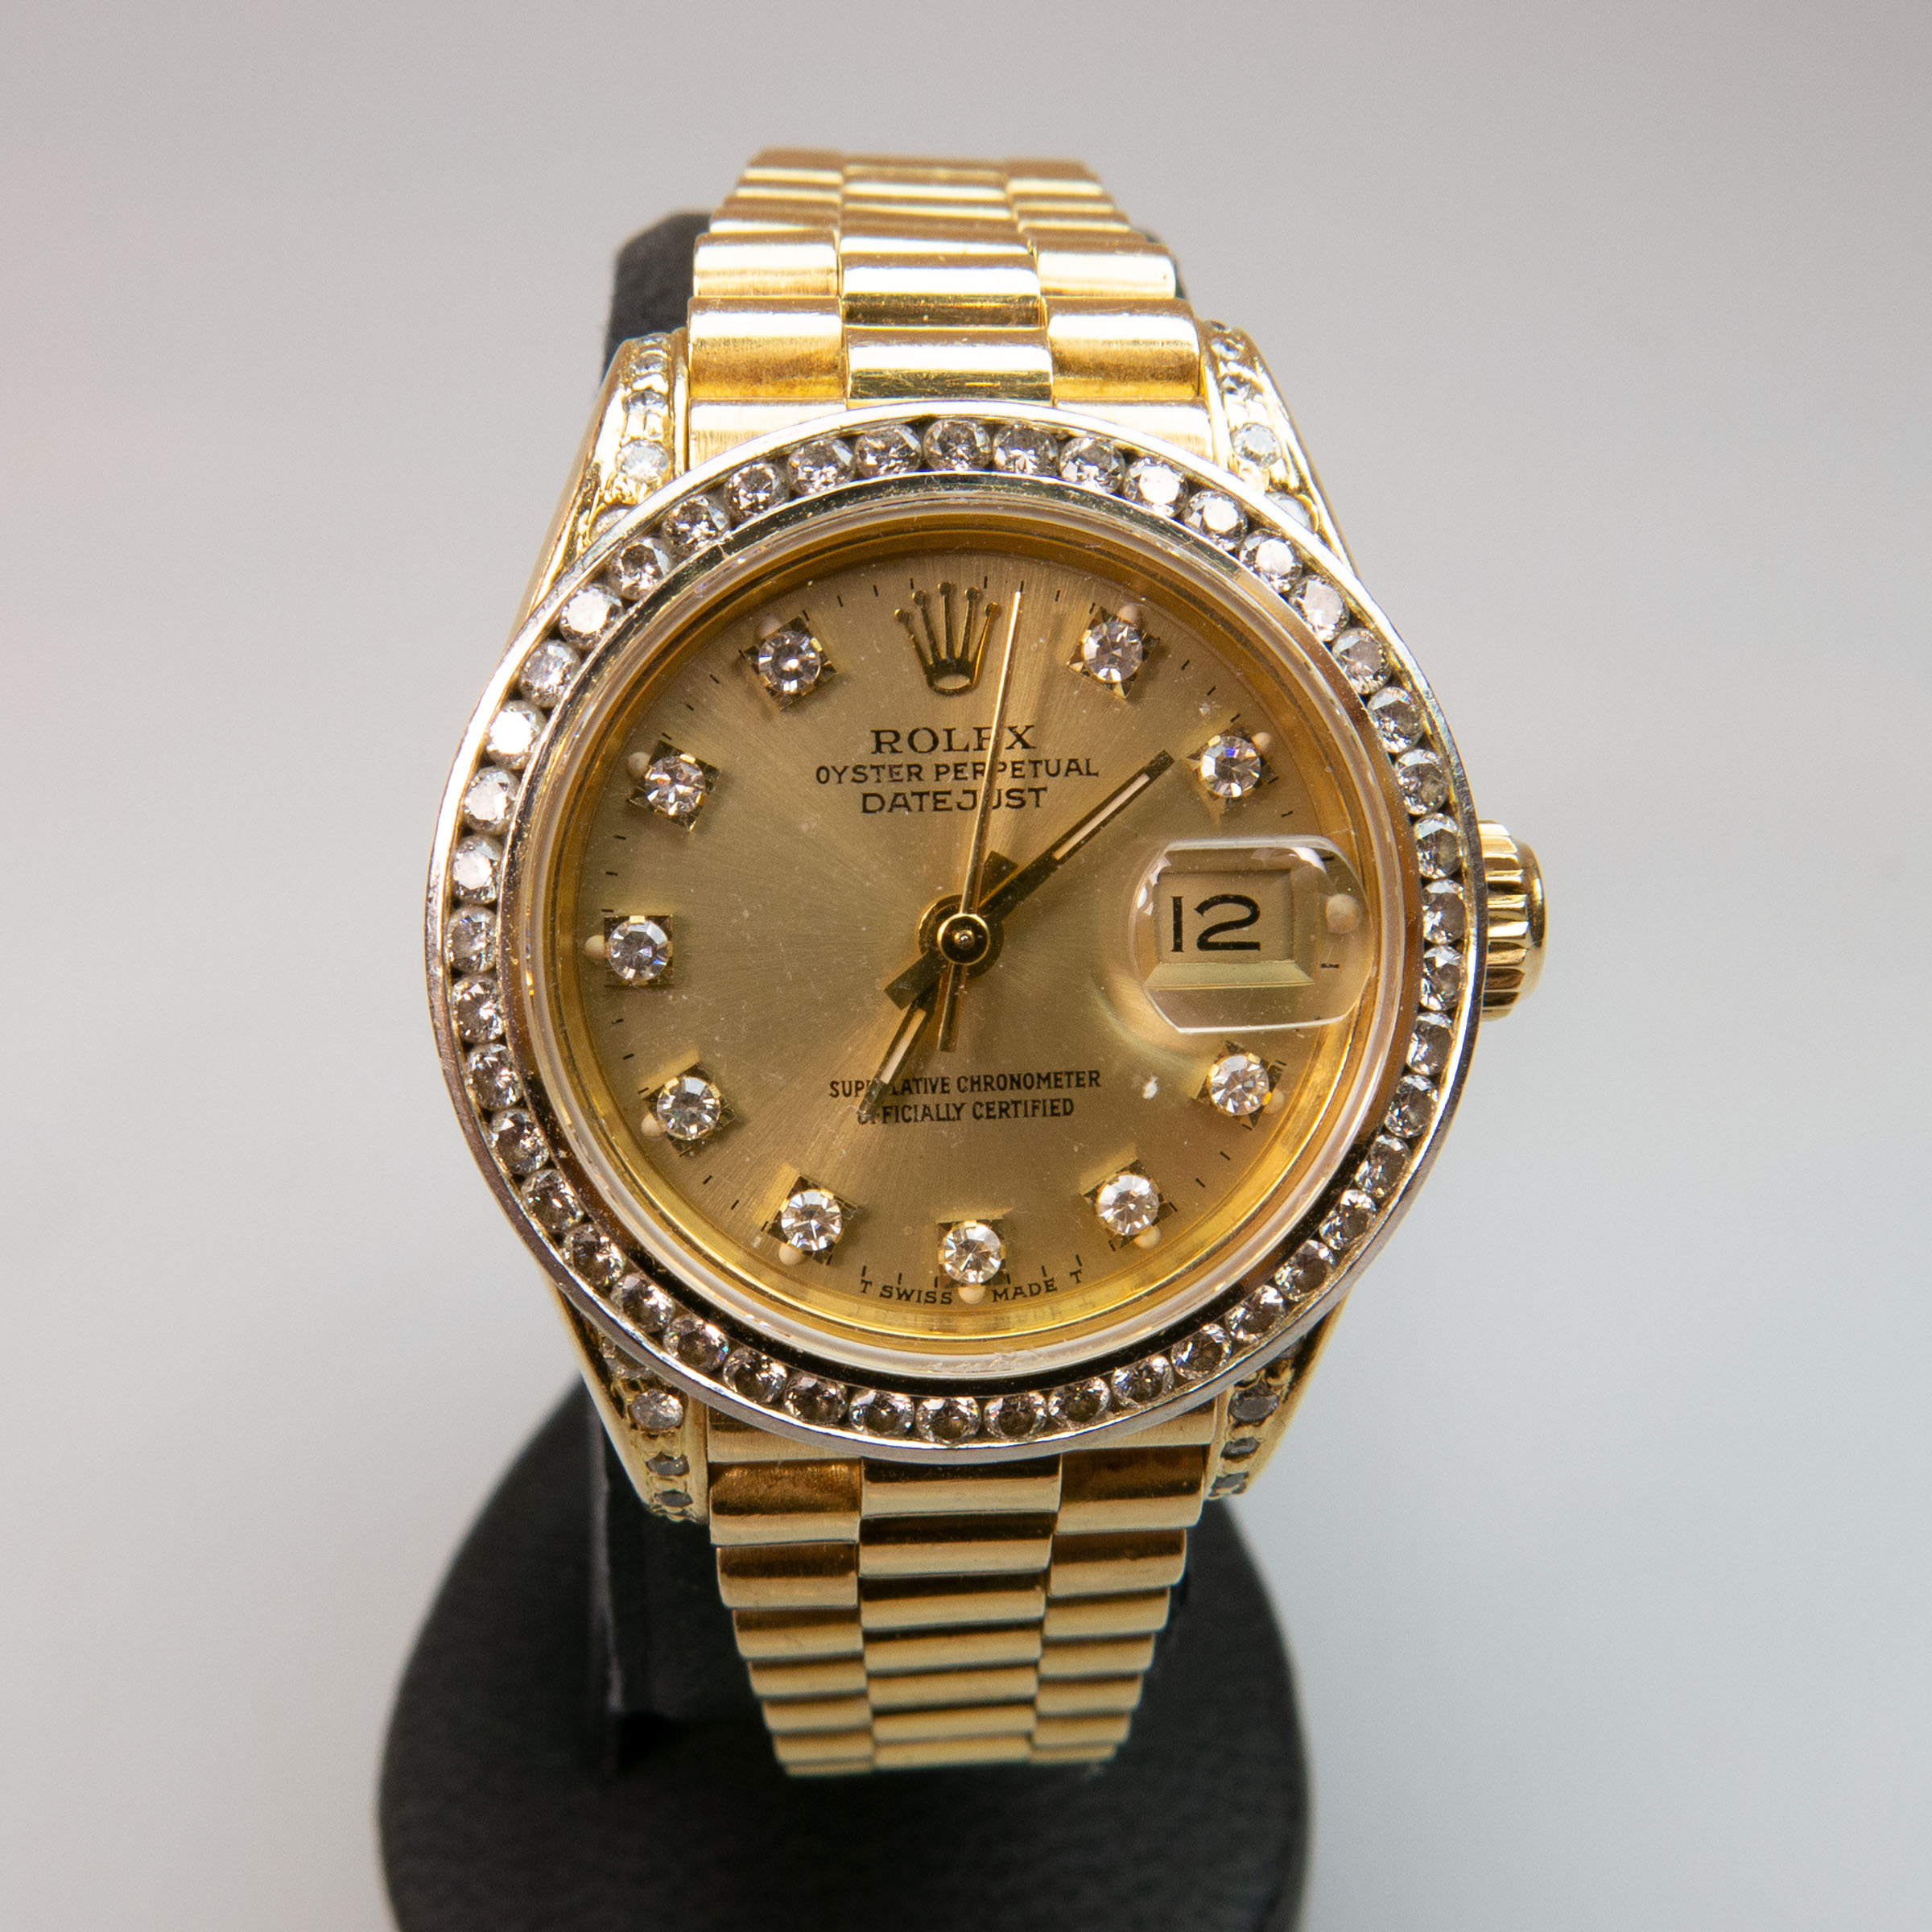 Lady's Rolex Oyster Perpetual Datejust Wristwatch